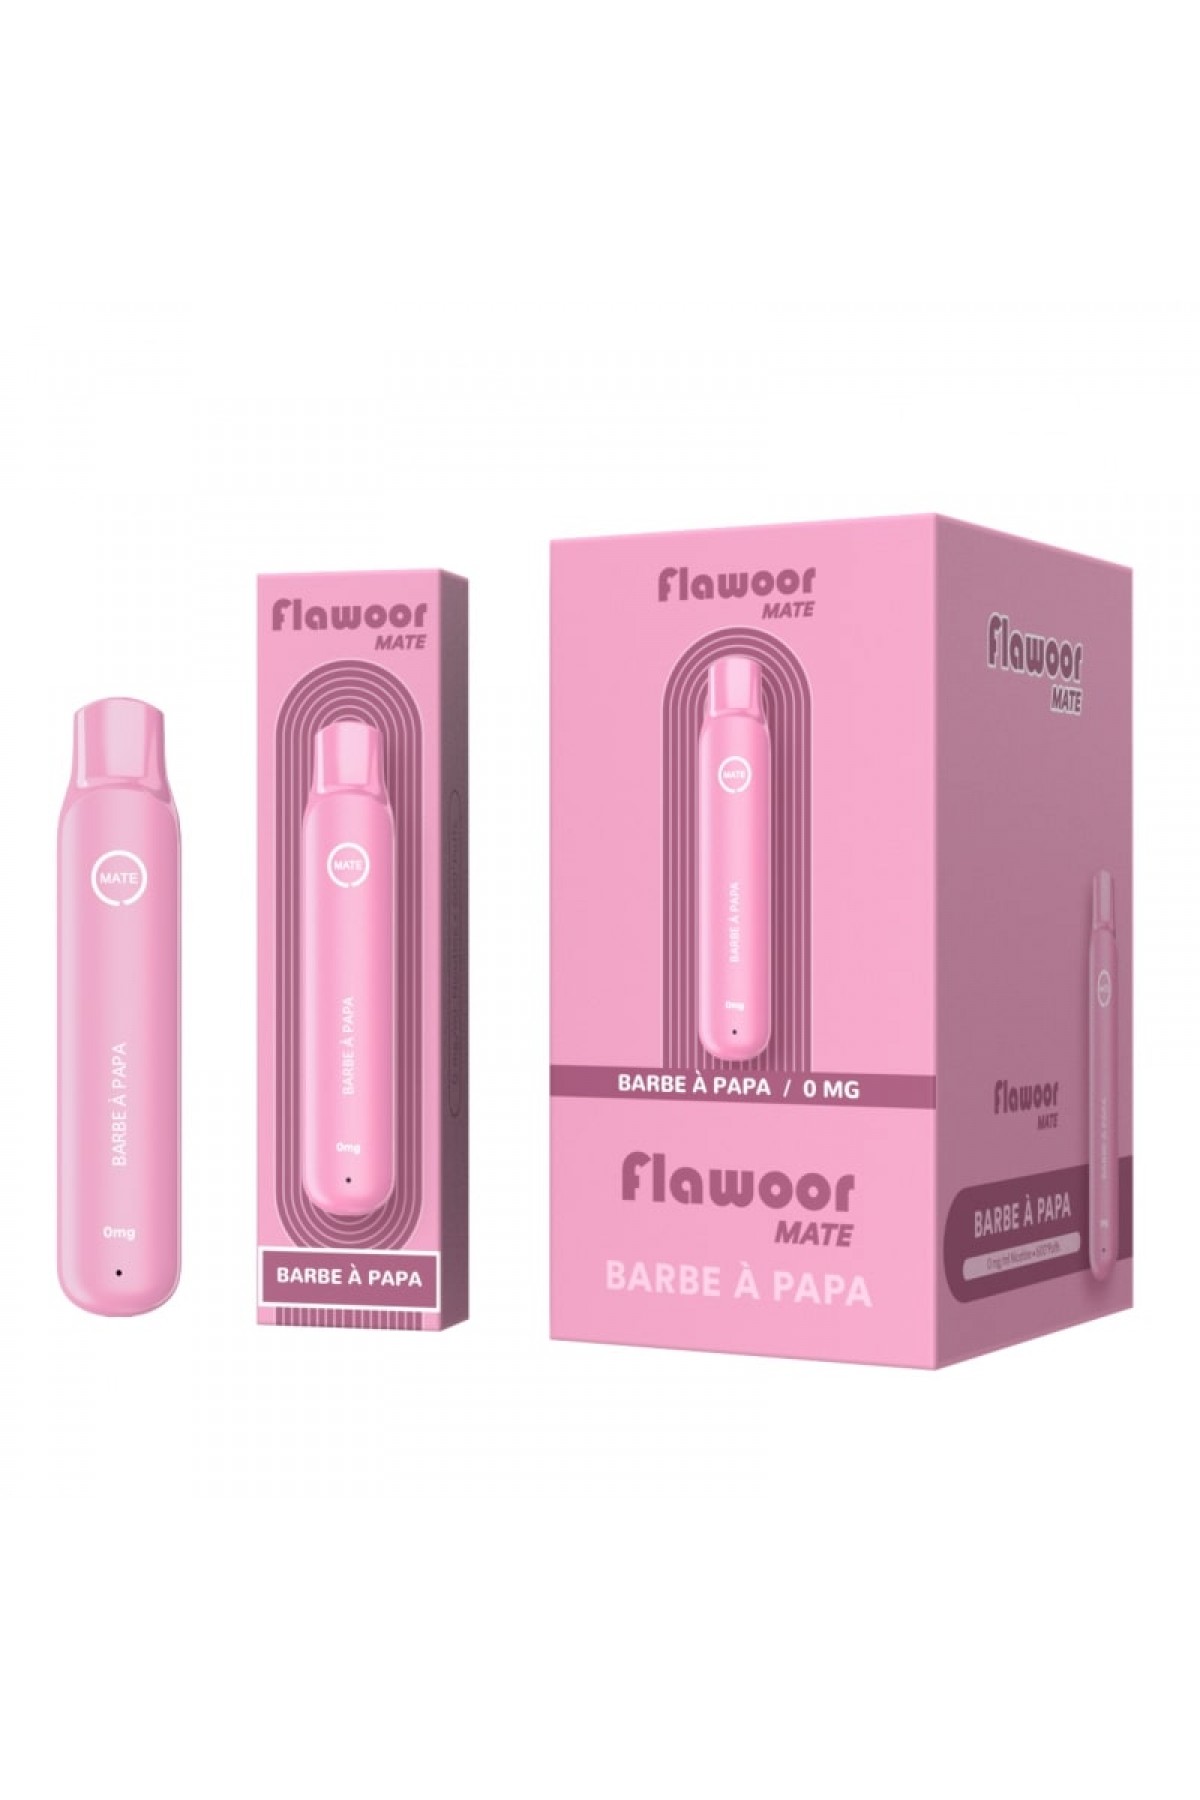 Flawoor Mate - Barbe À Papa 600 Puff Kit